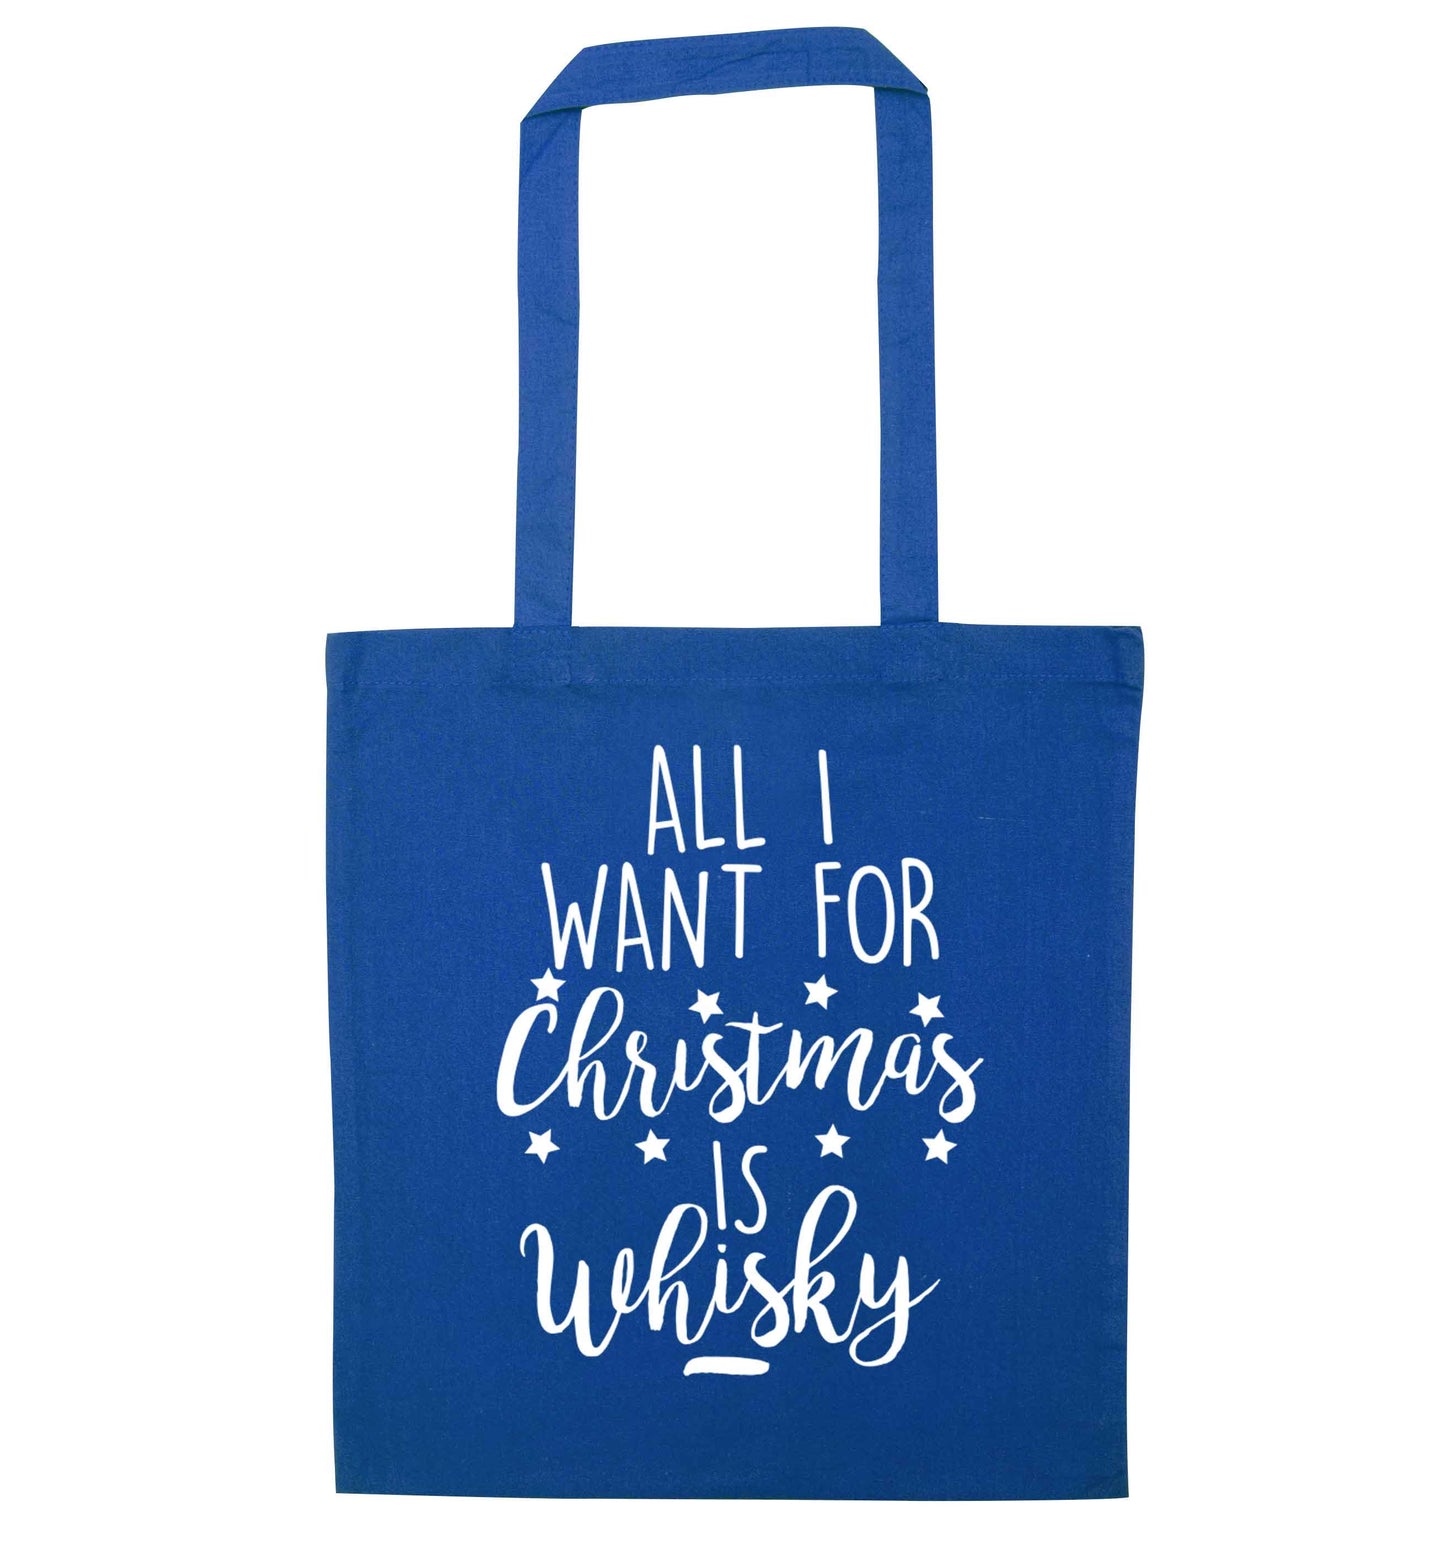 All I want for Christmas is whisky blue tote bag